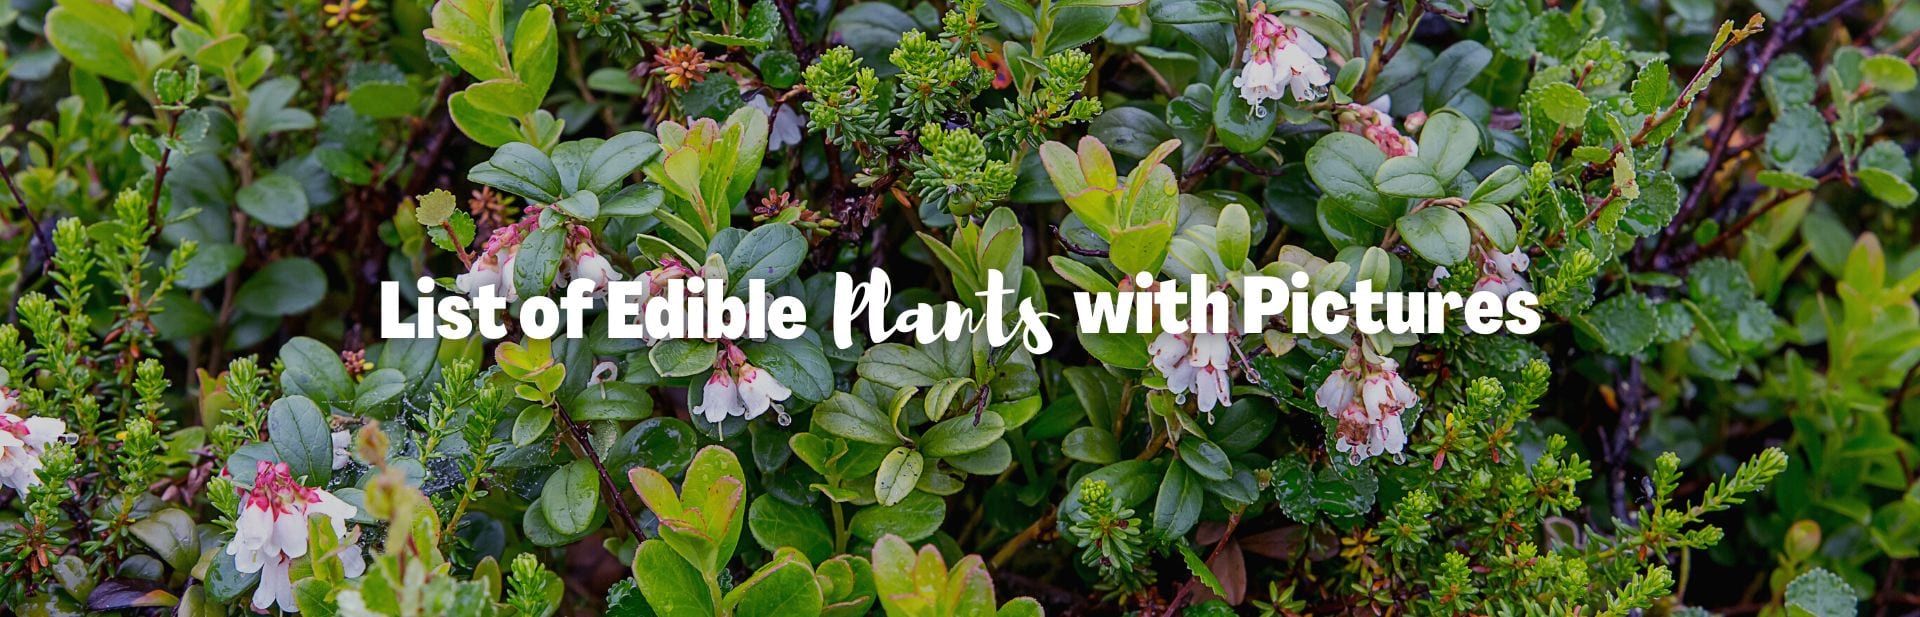 Mother Nature’s Kitchen: A List of 20 Edible Plants with Pictures